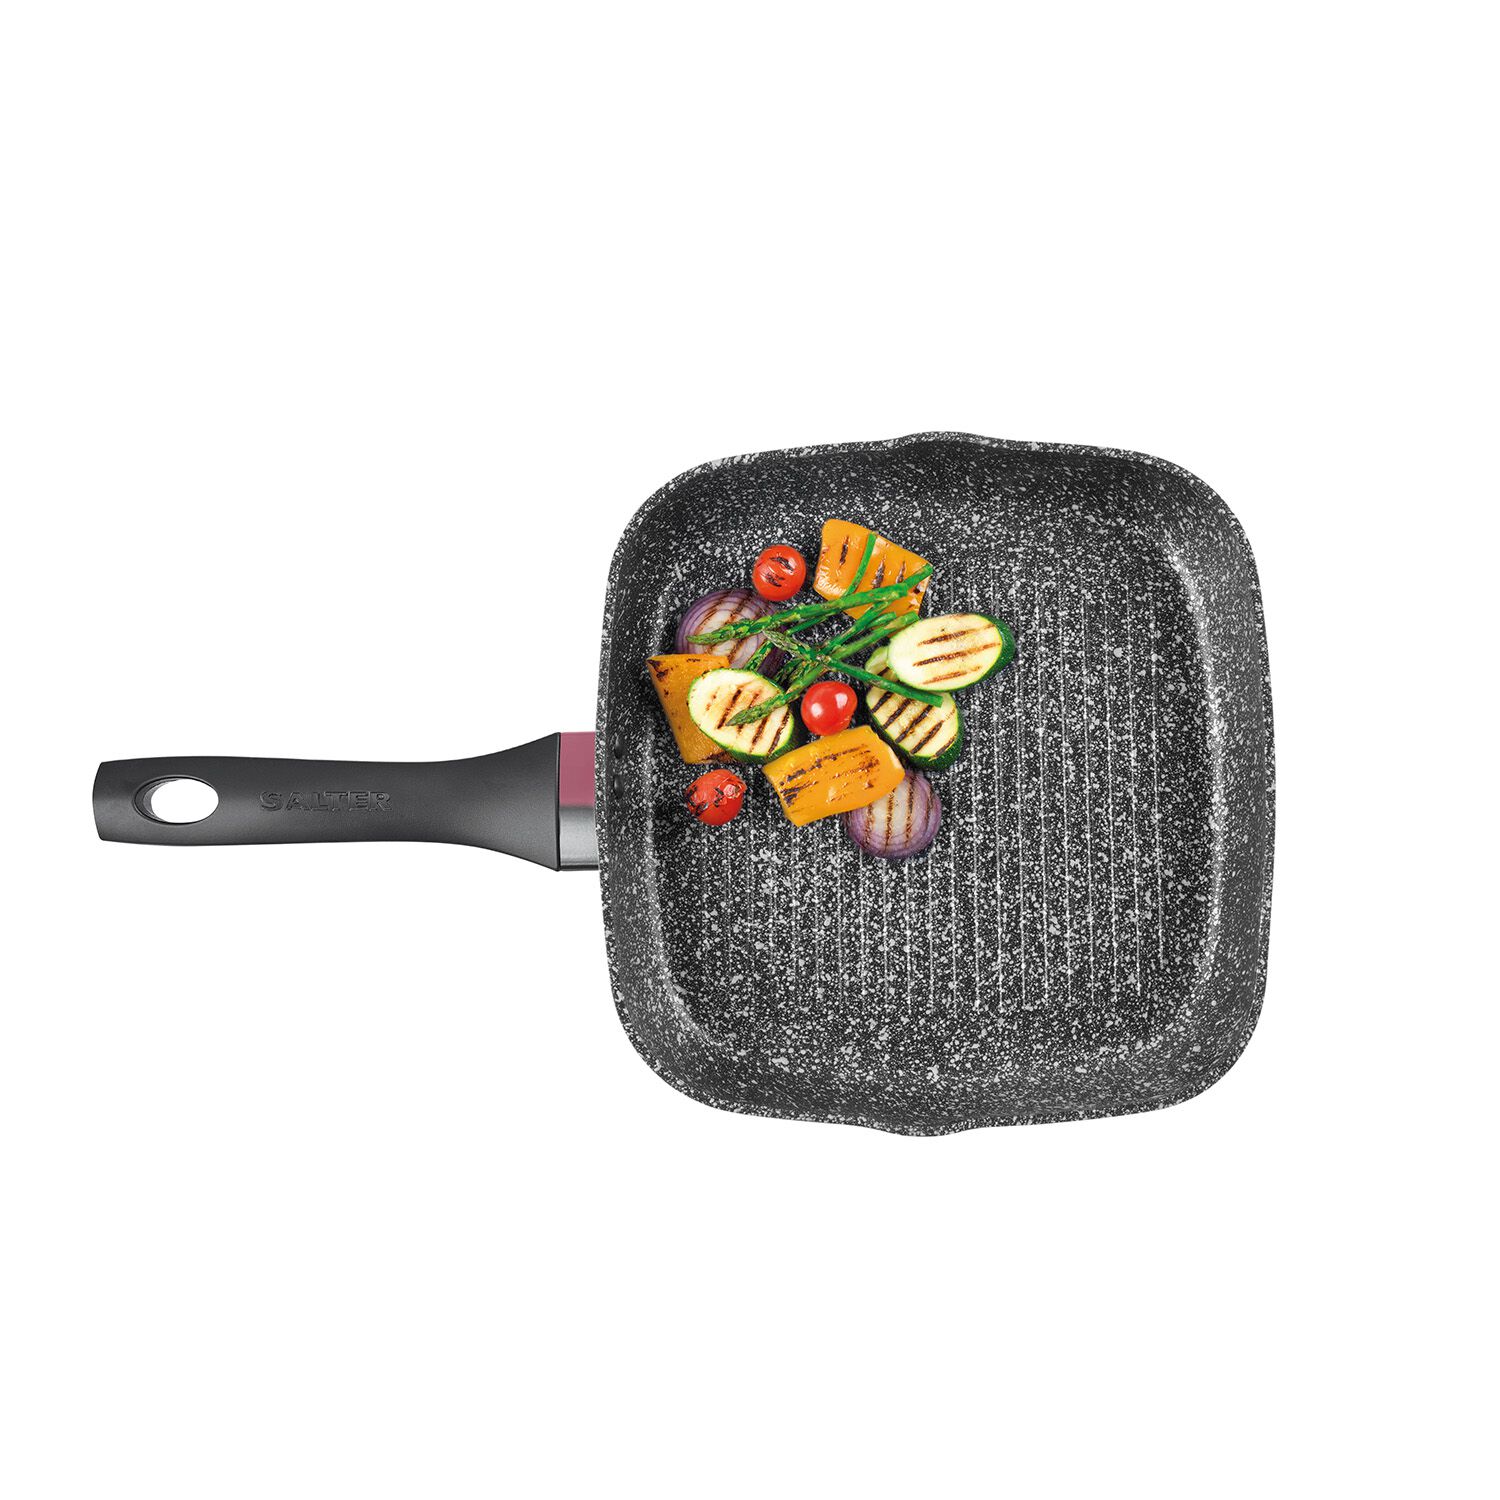 Salter Megastone Thermo Collar 30cm Frying Pan - Home Store + More